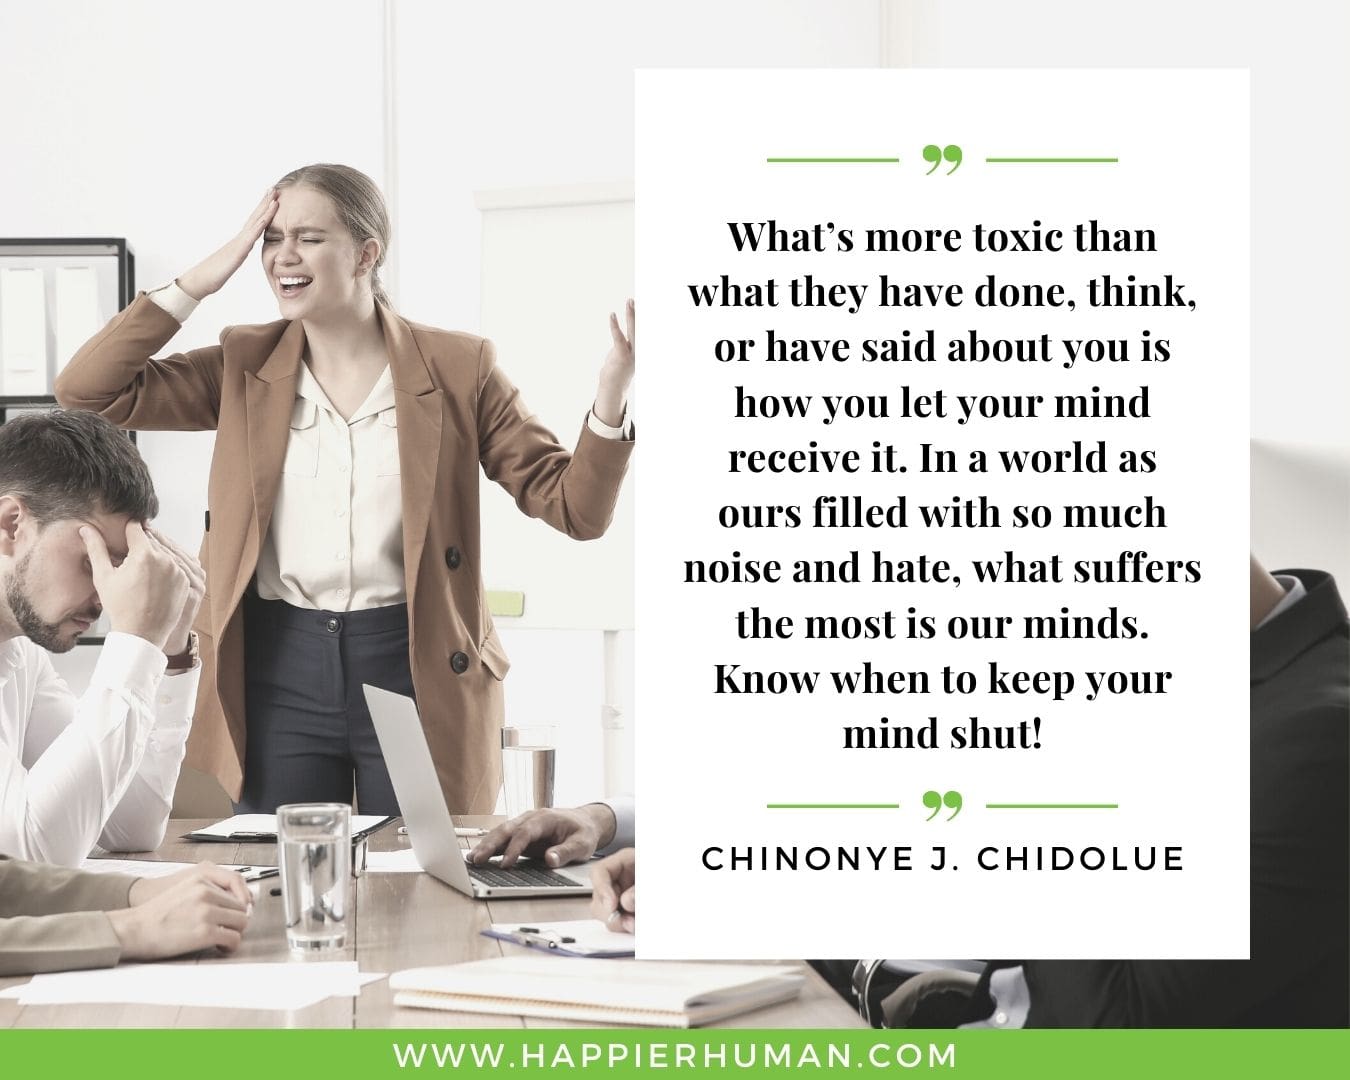 Toxic People Quotes - “What’s more toxic than what they have done, think, or have said about you is how you let your mind receive it. In a world as ours filled with so much noise and hate, what suffers the most is our minds. Know when to keep your mind shut!” – Chinonye J. Chidolue